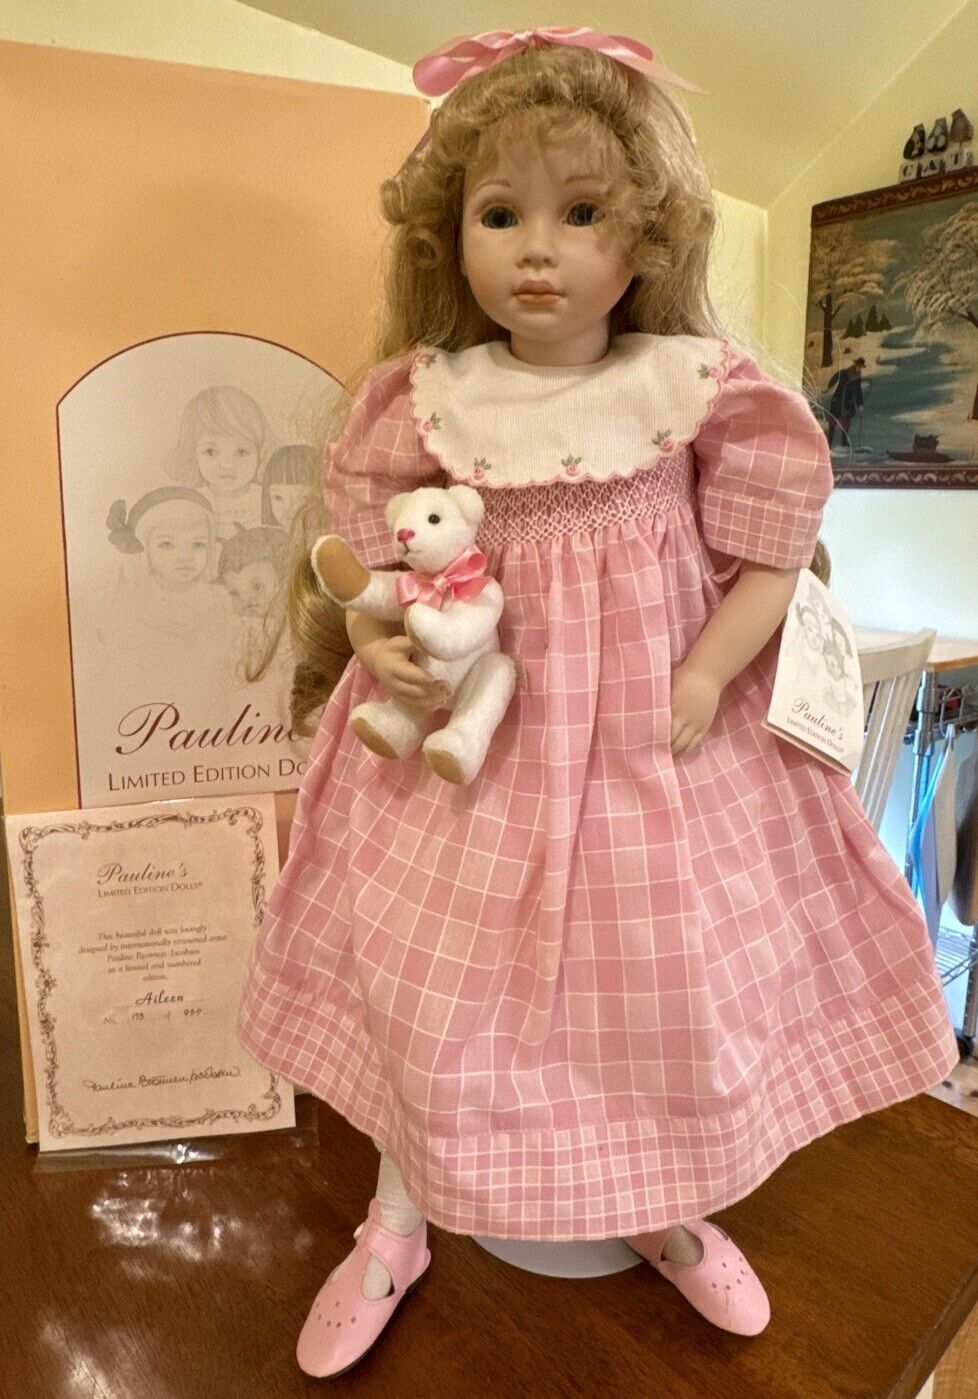 Bisque Artist Doll Pauline’s Limited Edition Dolls “AILEEN W/Bear # 173/950.